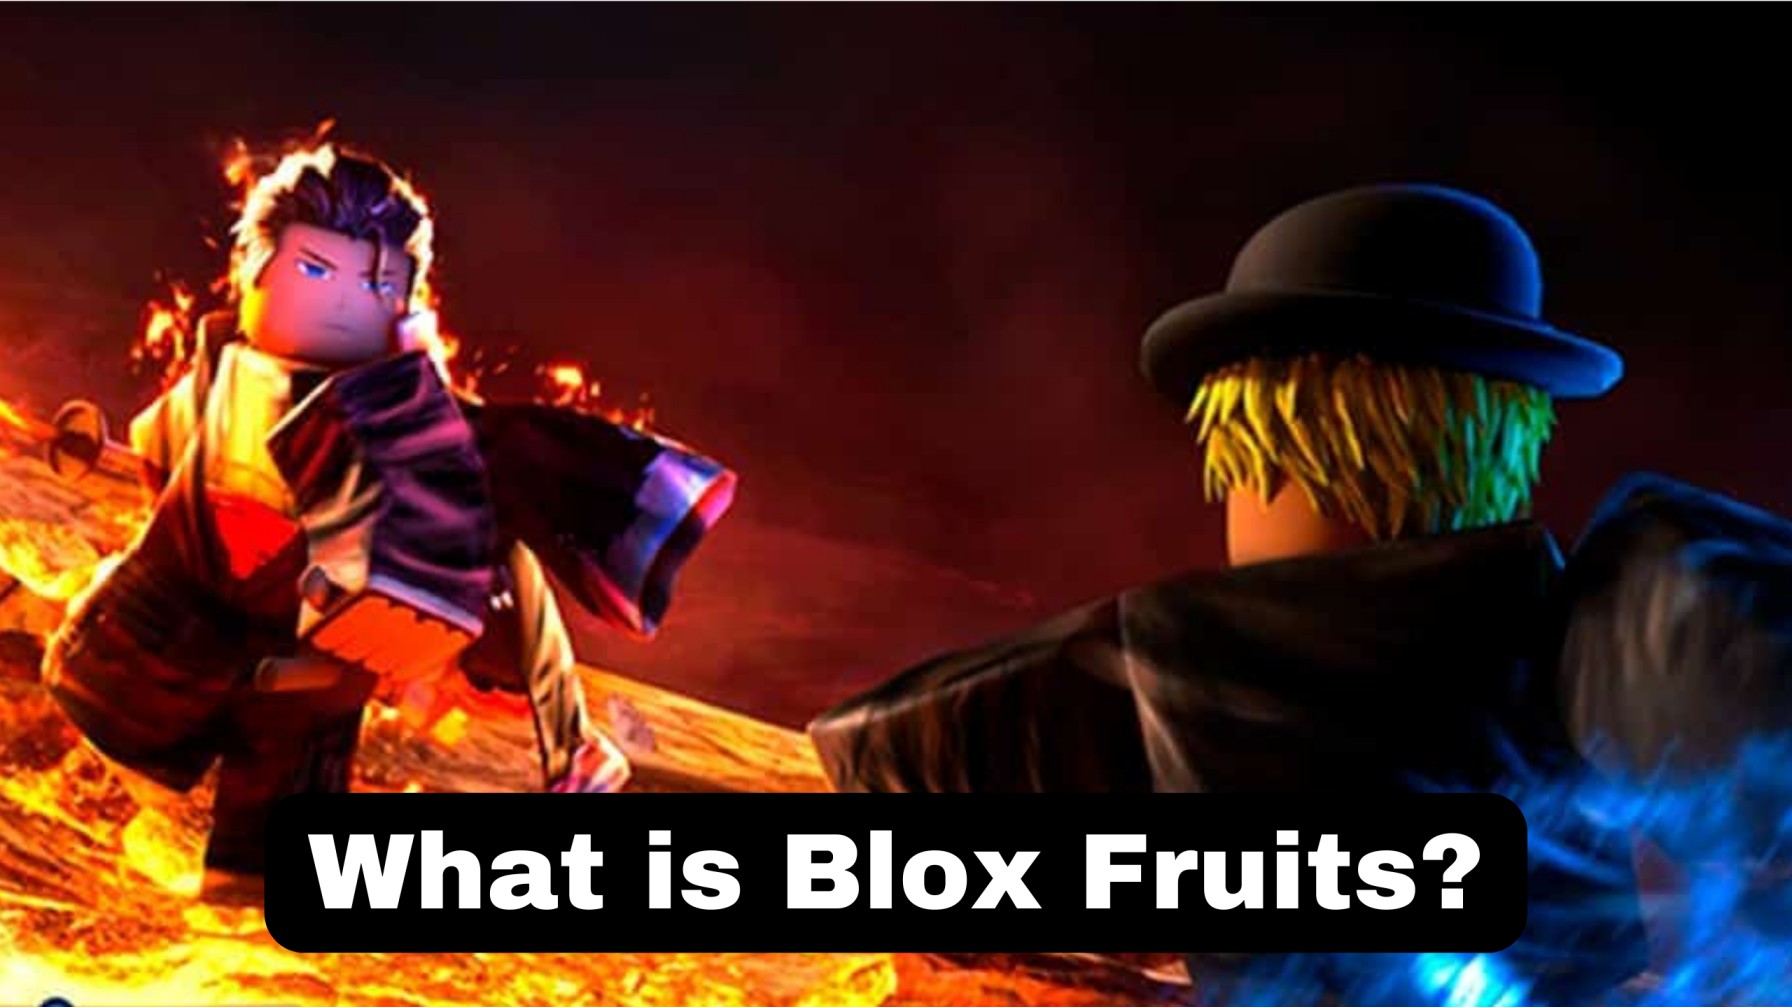 What is Blox Fruits